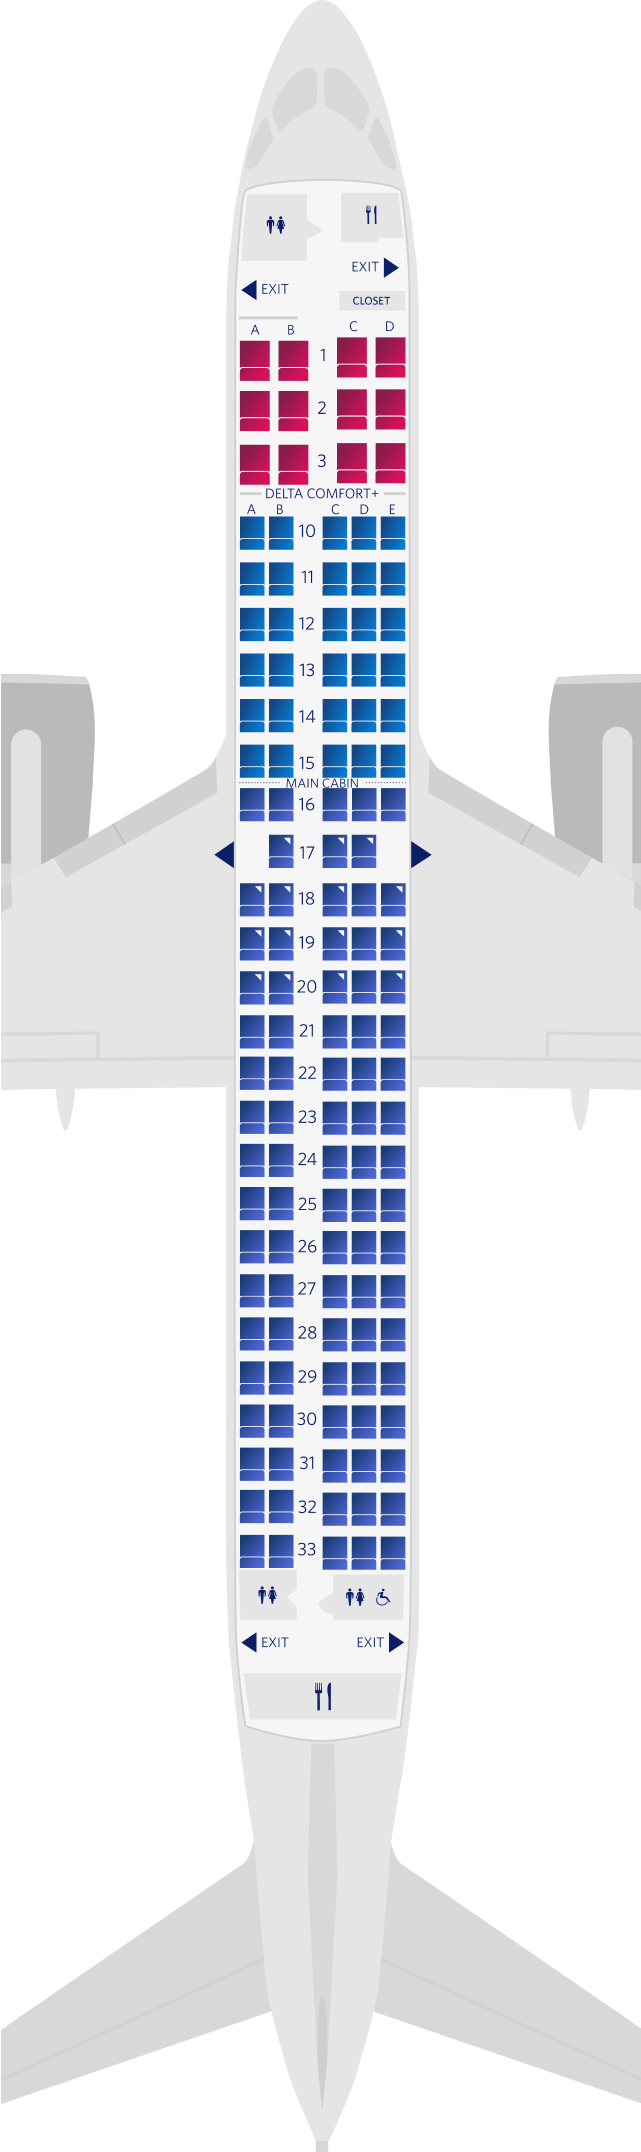 Airbus A220-300 Seat Map